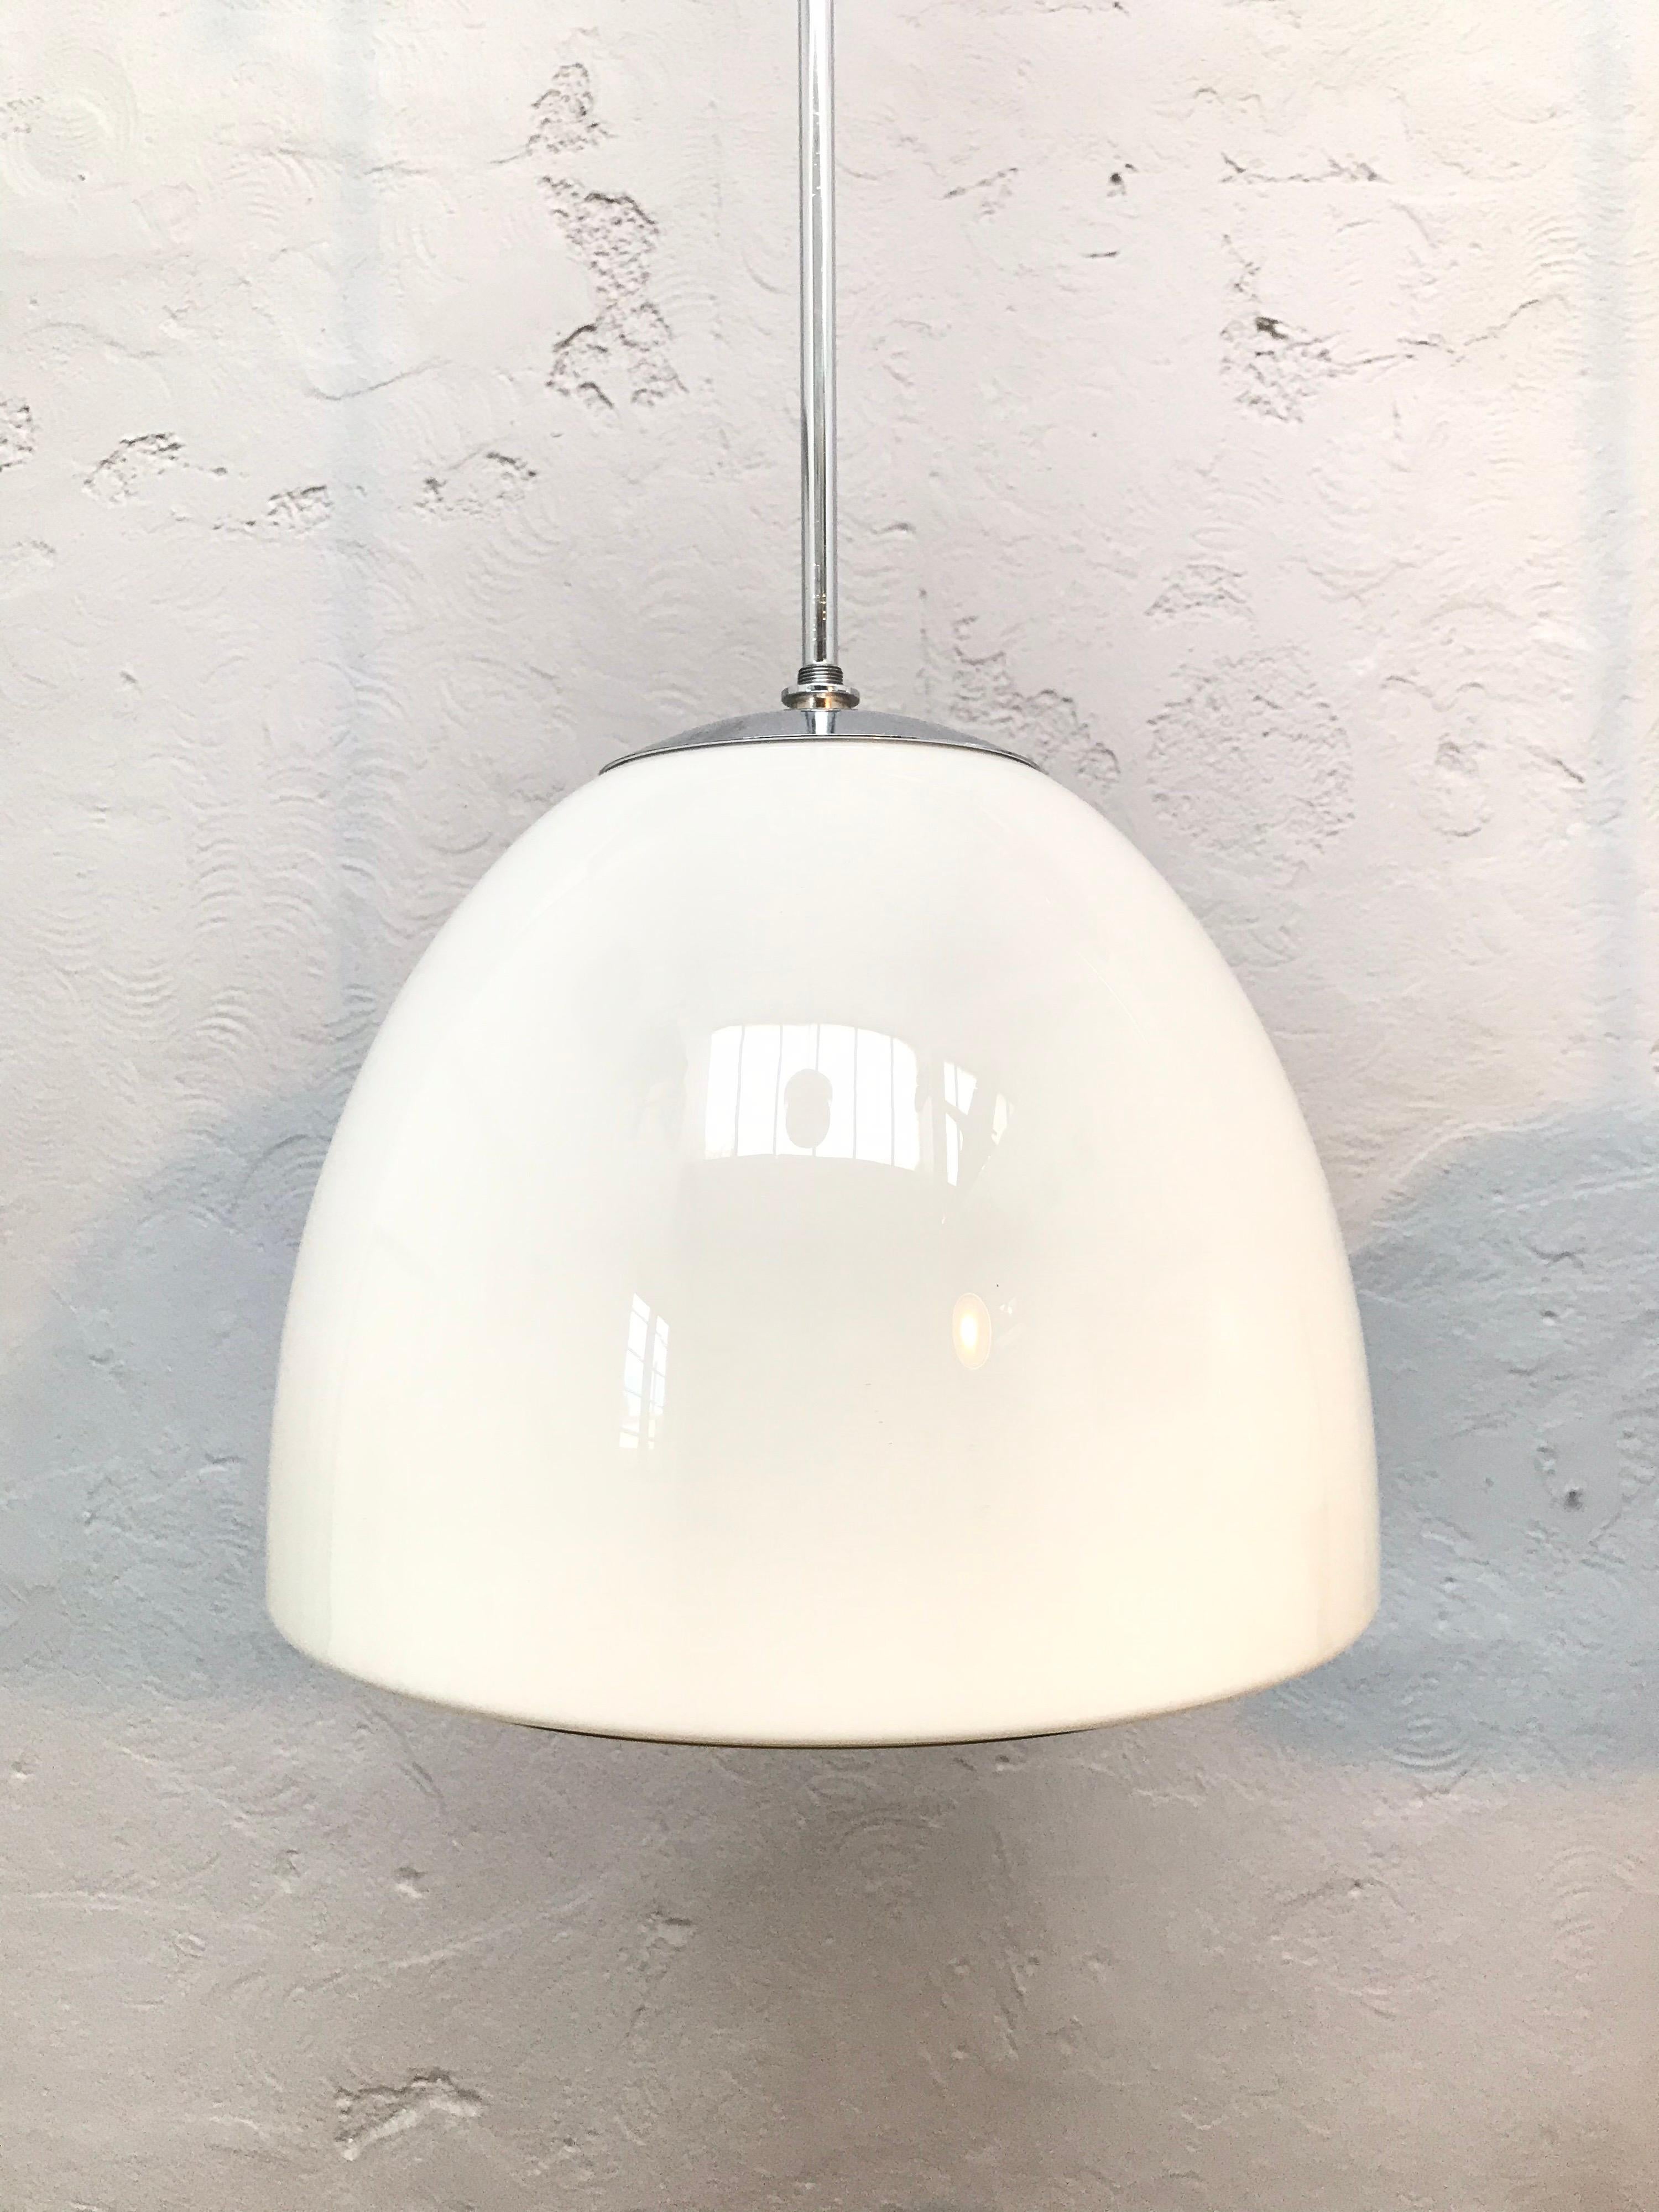 Vintage Danish Vilhelm Lauritzen for Louis Poulsen opaline glass bell shaped pendant chandeliers.
In original condition with new wiring and grounded.
Hanging on a 60cm long nickel-plated copper pipe that can be shortened and rethreaded if so